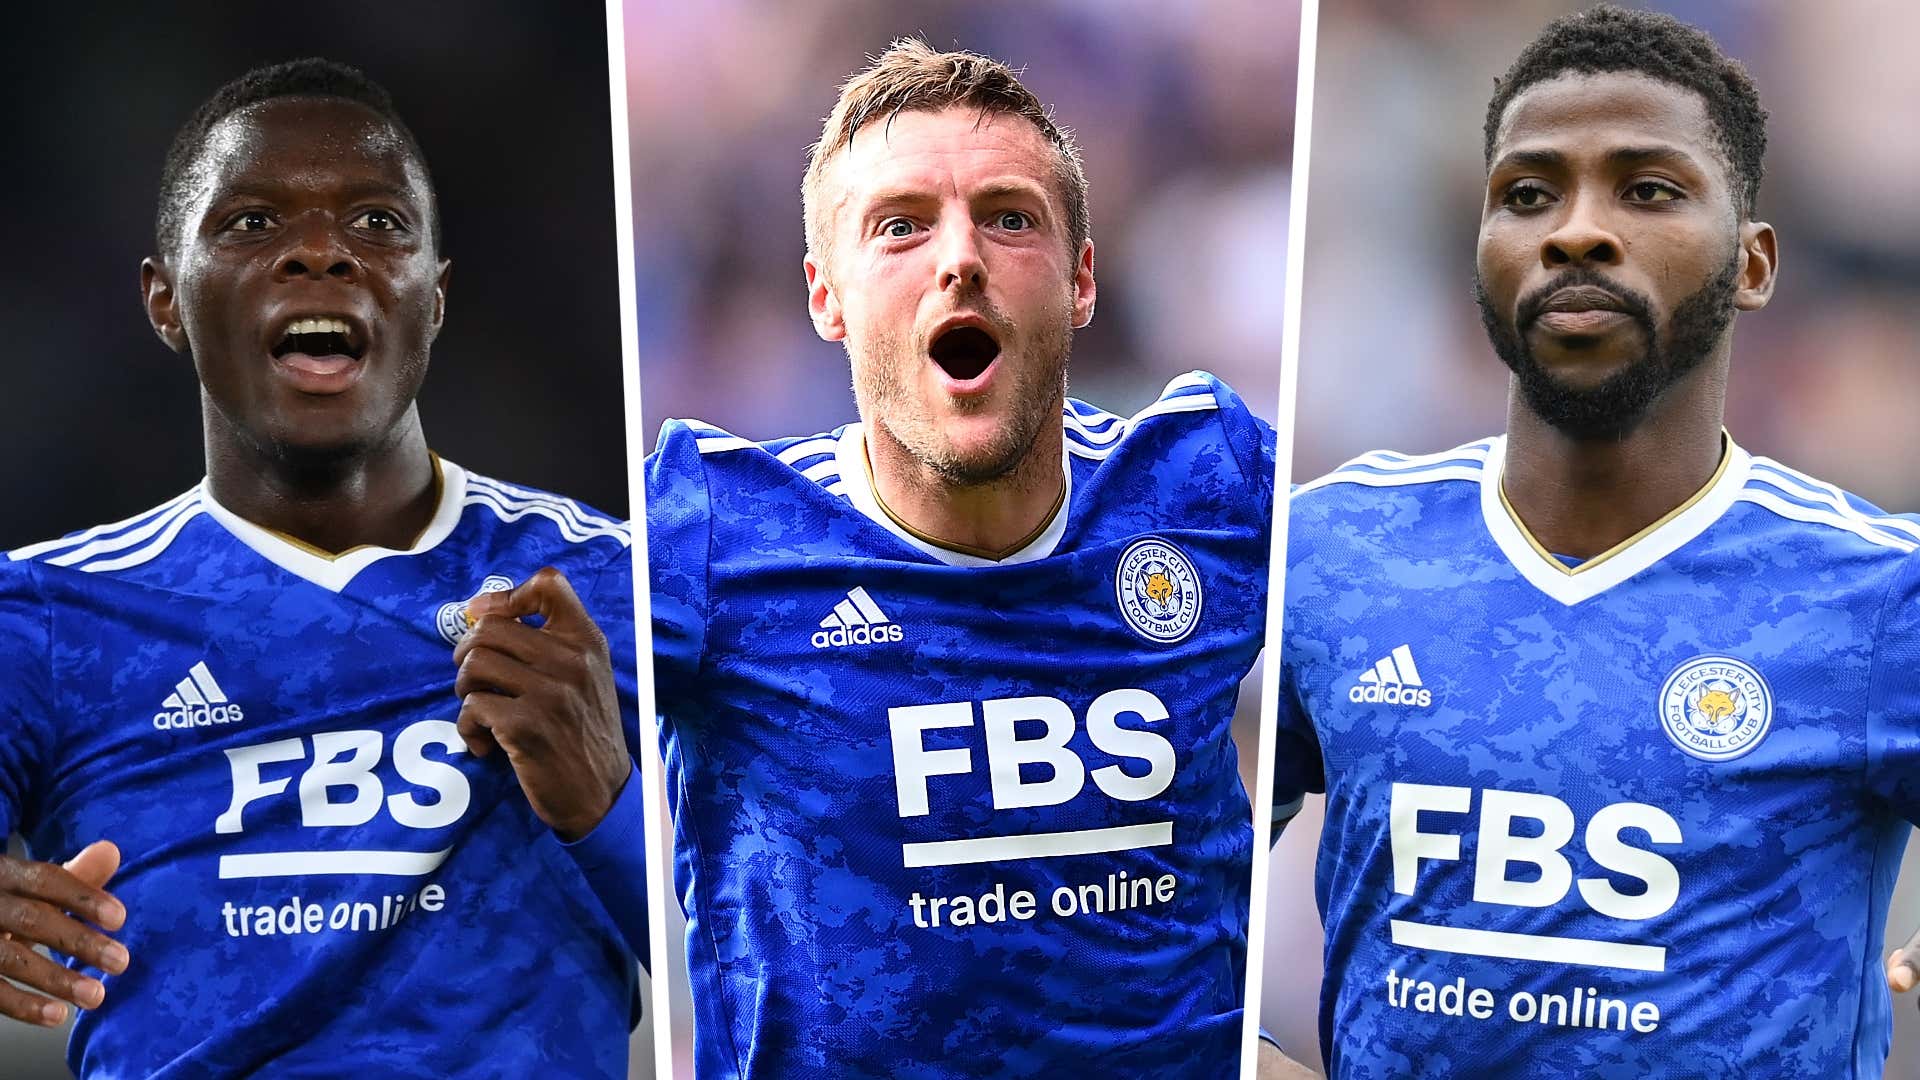 Photo of Vardy, Iheanacho or Daka: Which Leicester City striker will score the most goals this season?